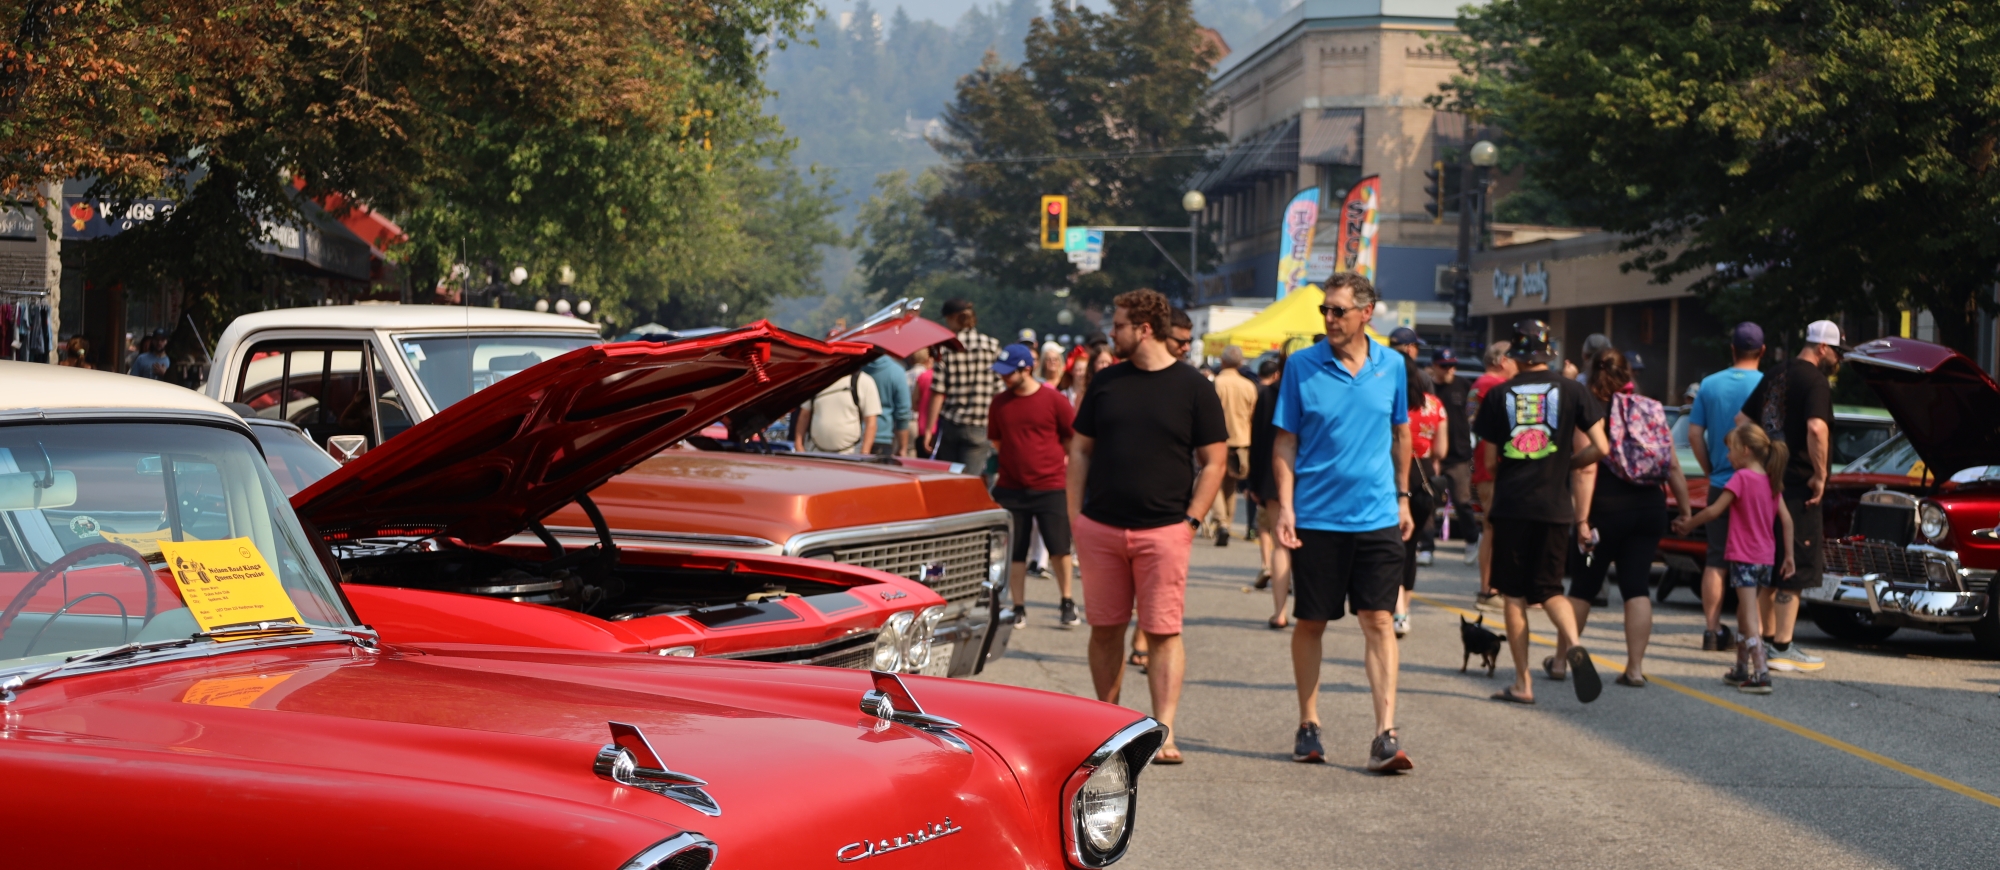 A red car in the foreground with people walking around enjoying the Queen City Car Show in Nelson. Photo by Janelle Lewchuk.